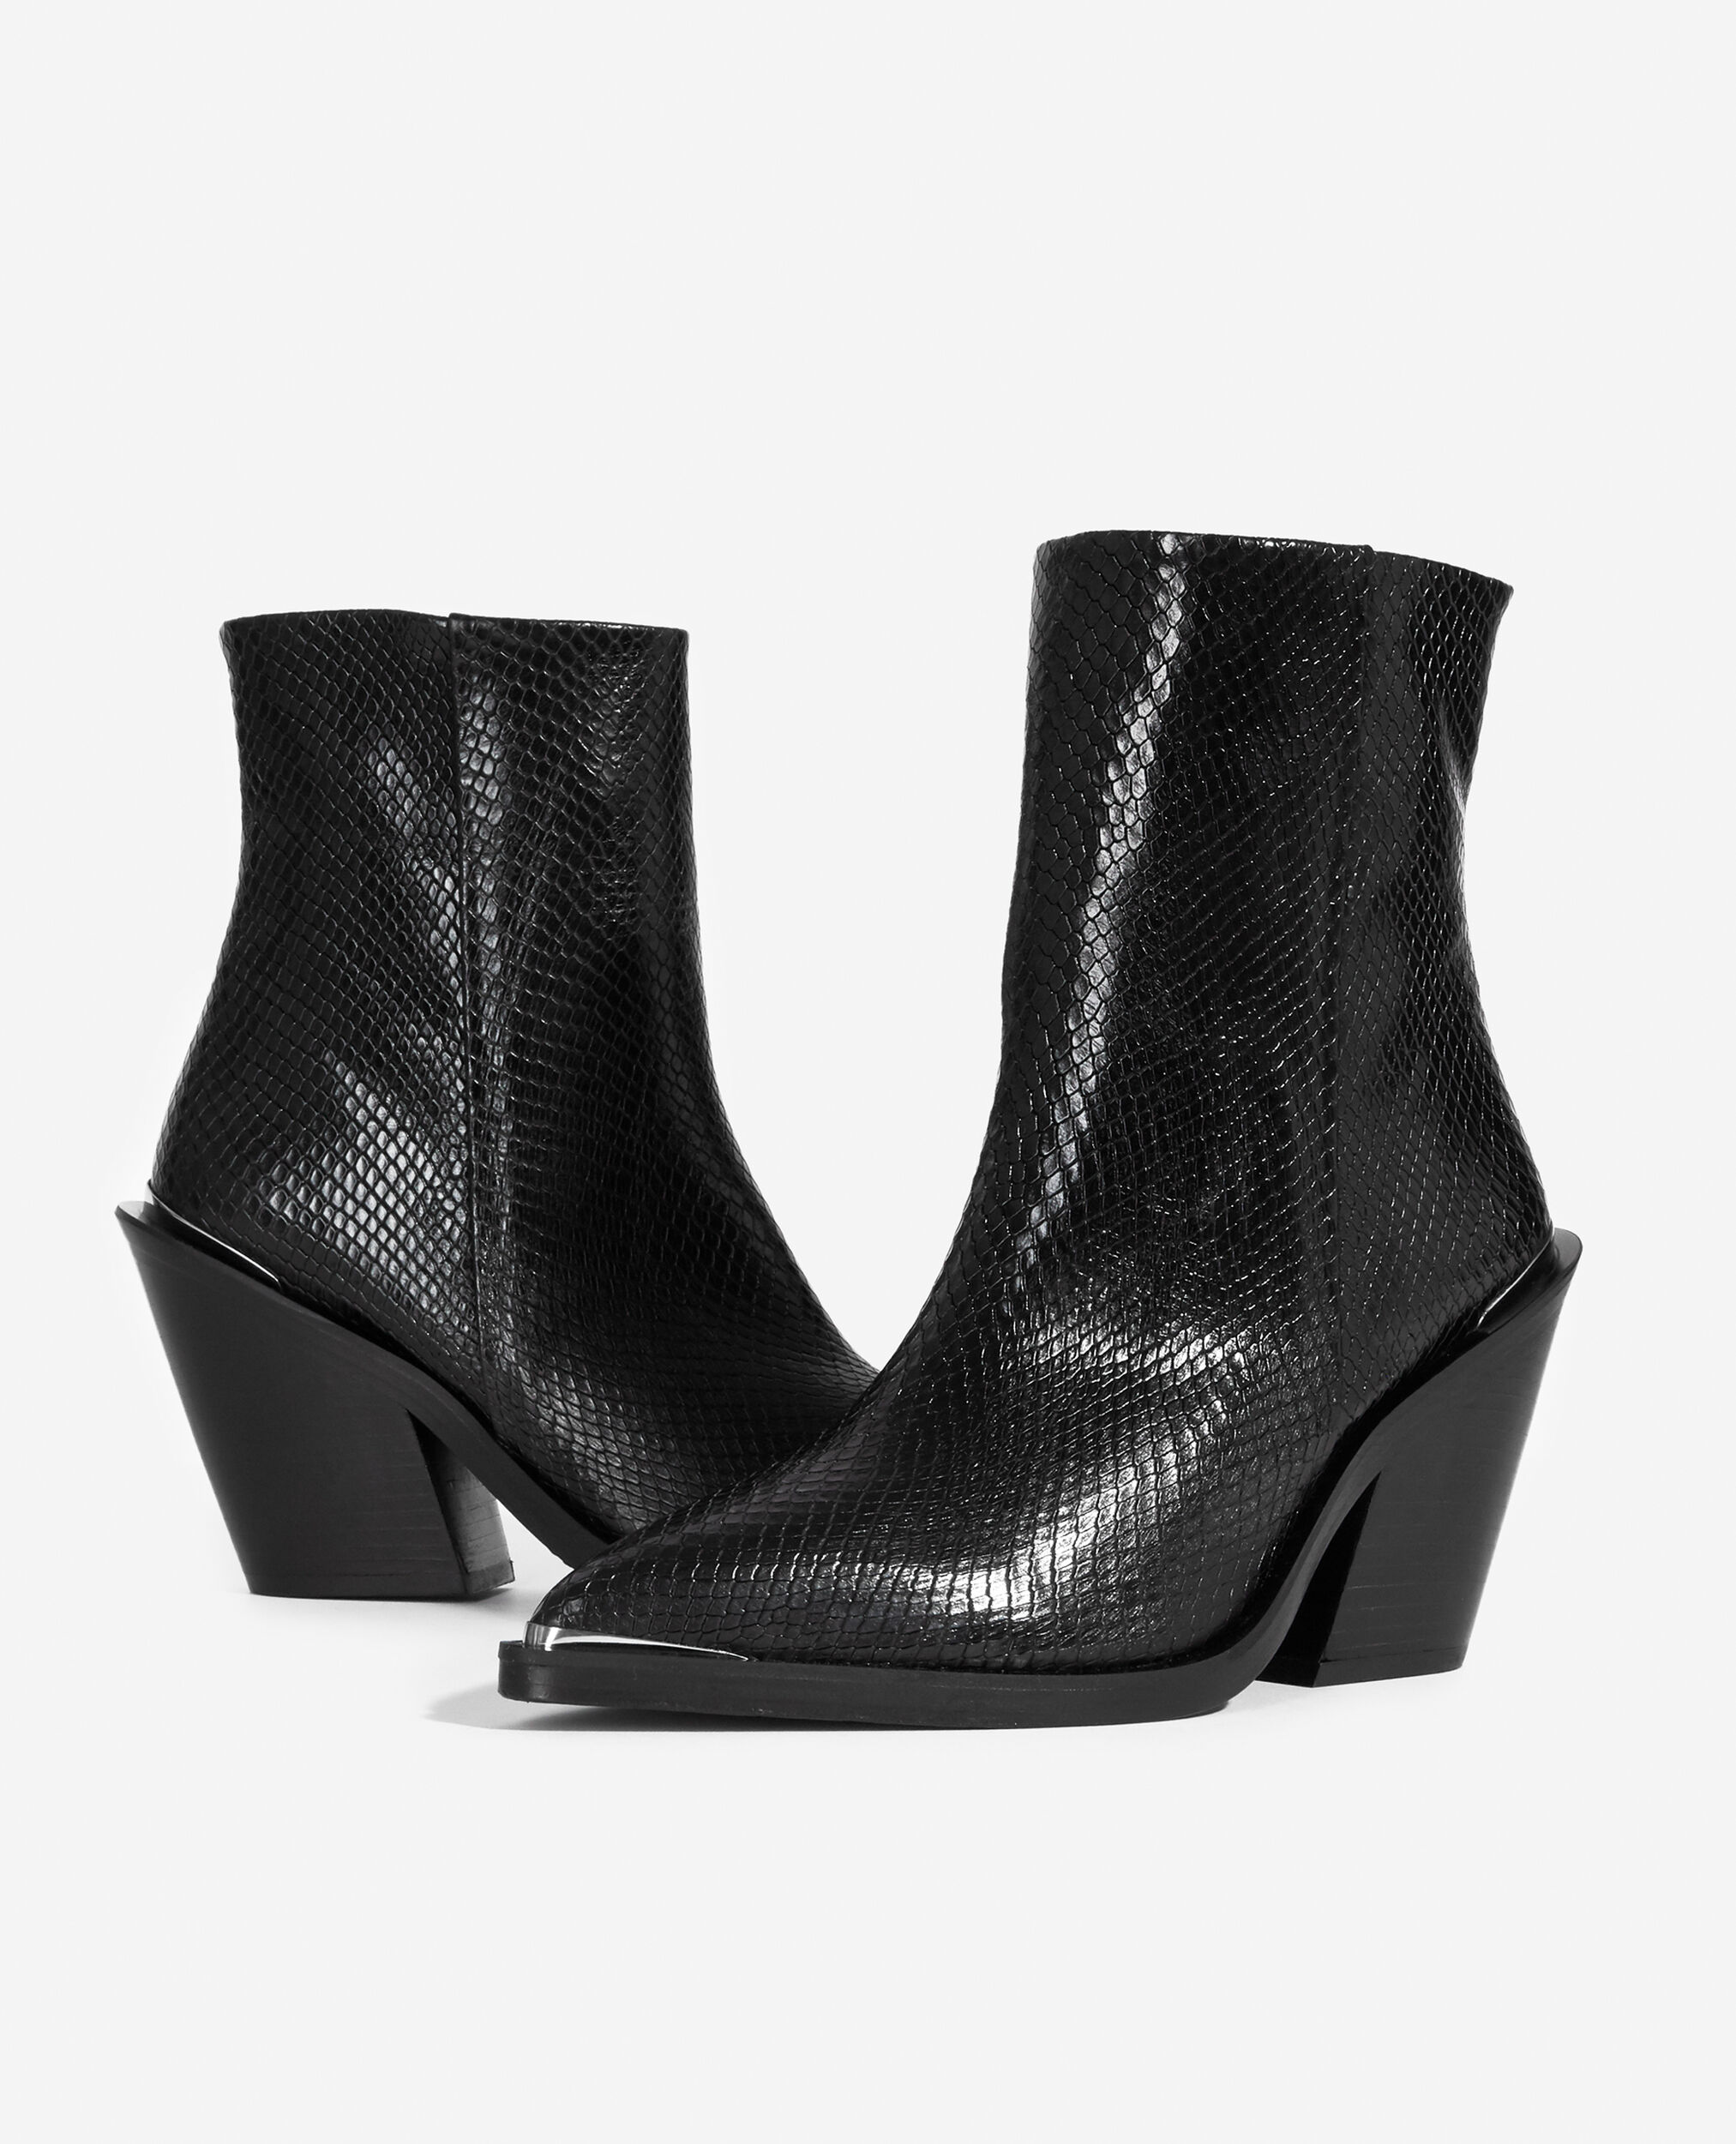 Heeled ankle boots in snake-effect leather | The Kooples - UK